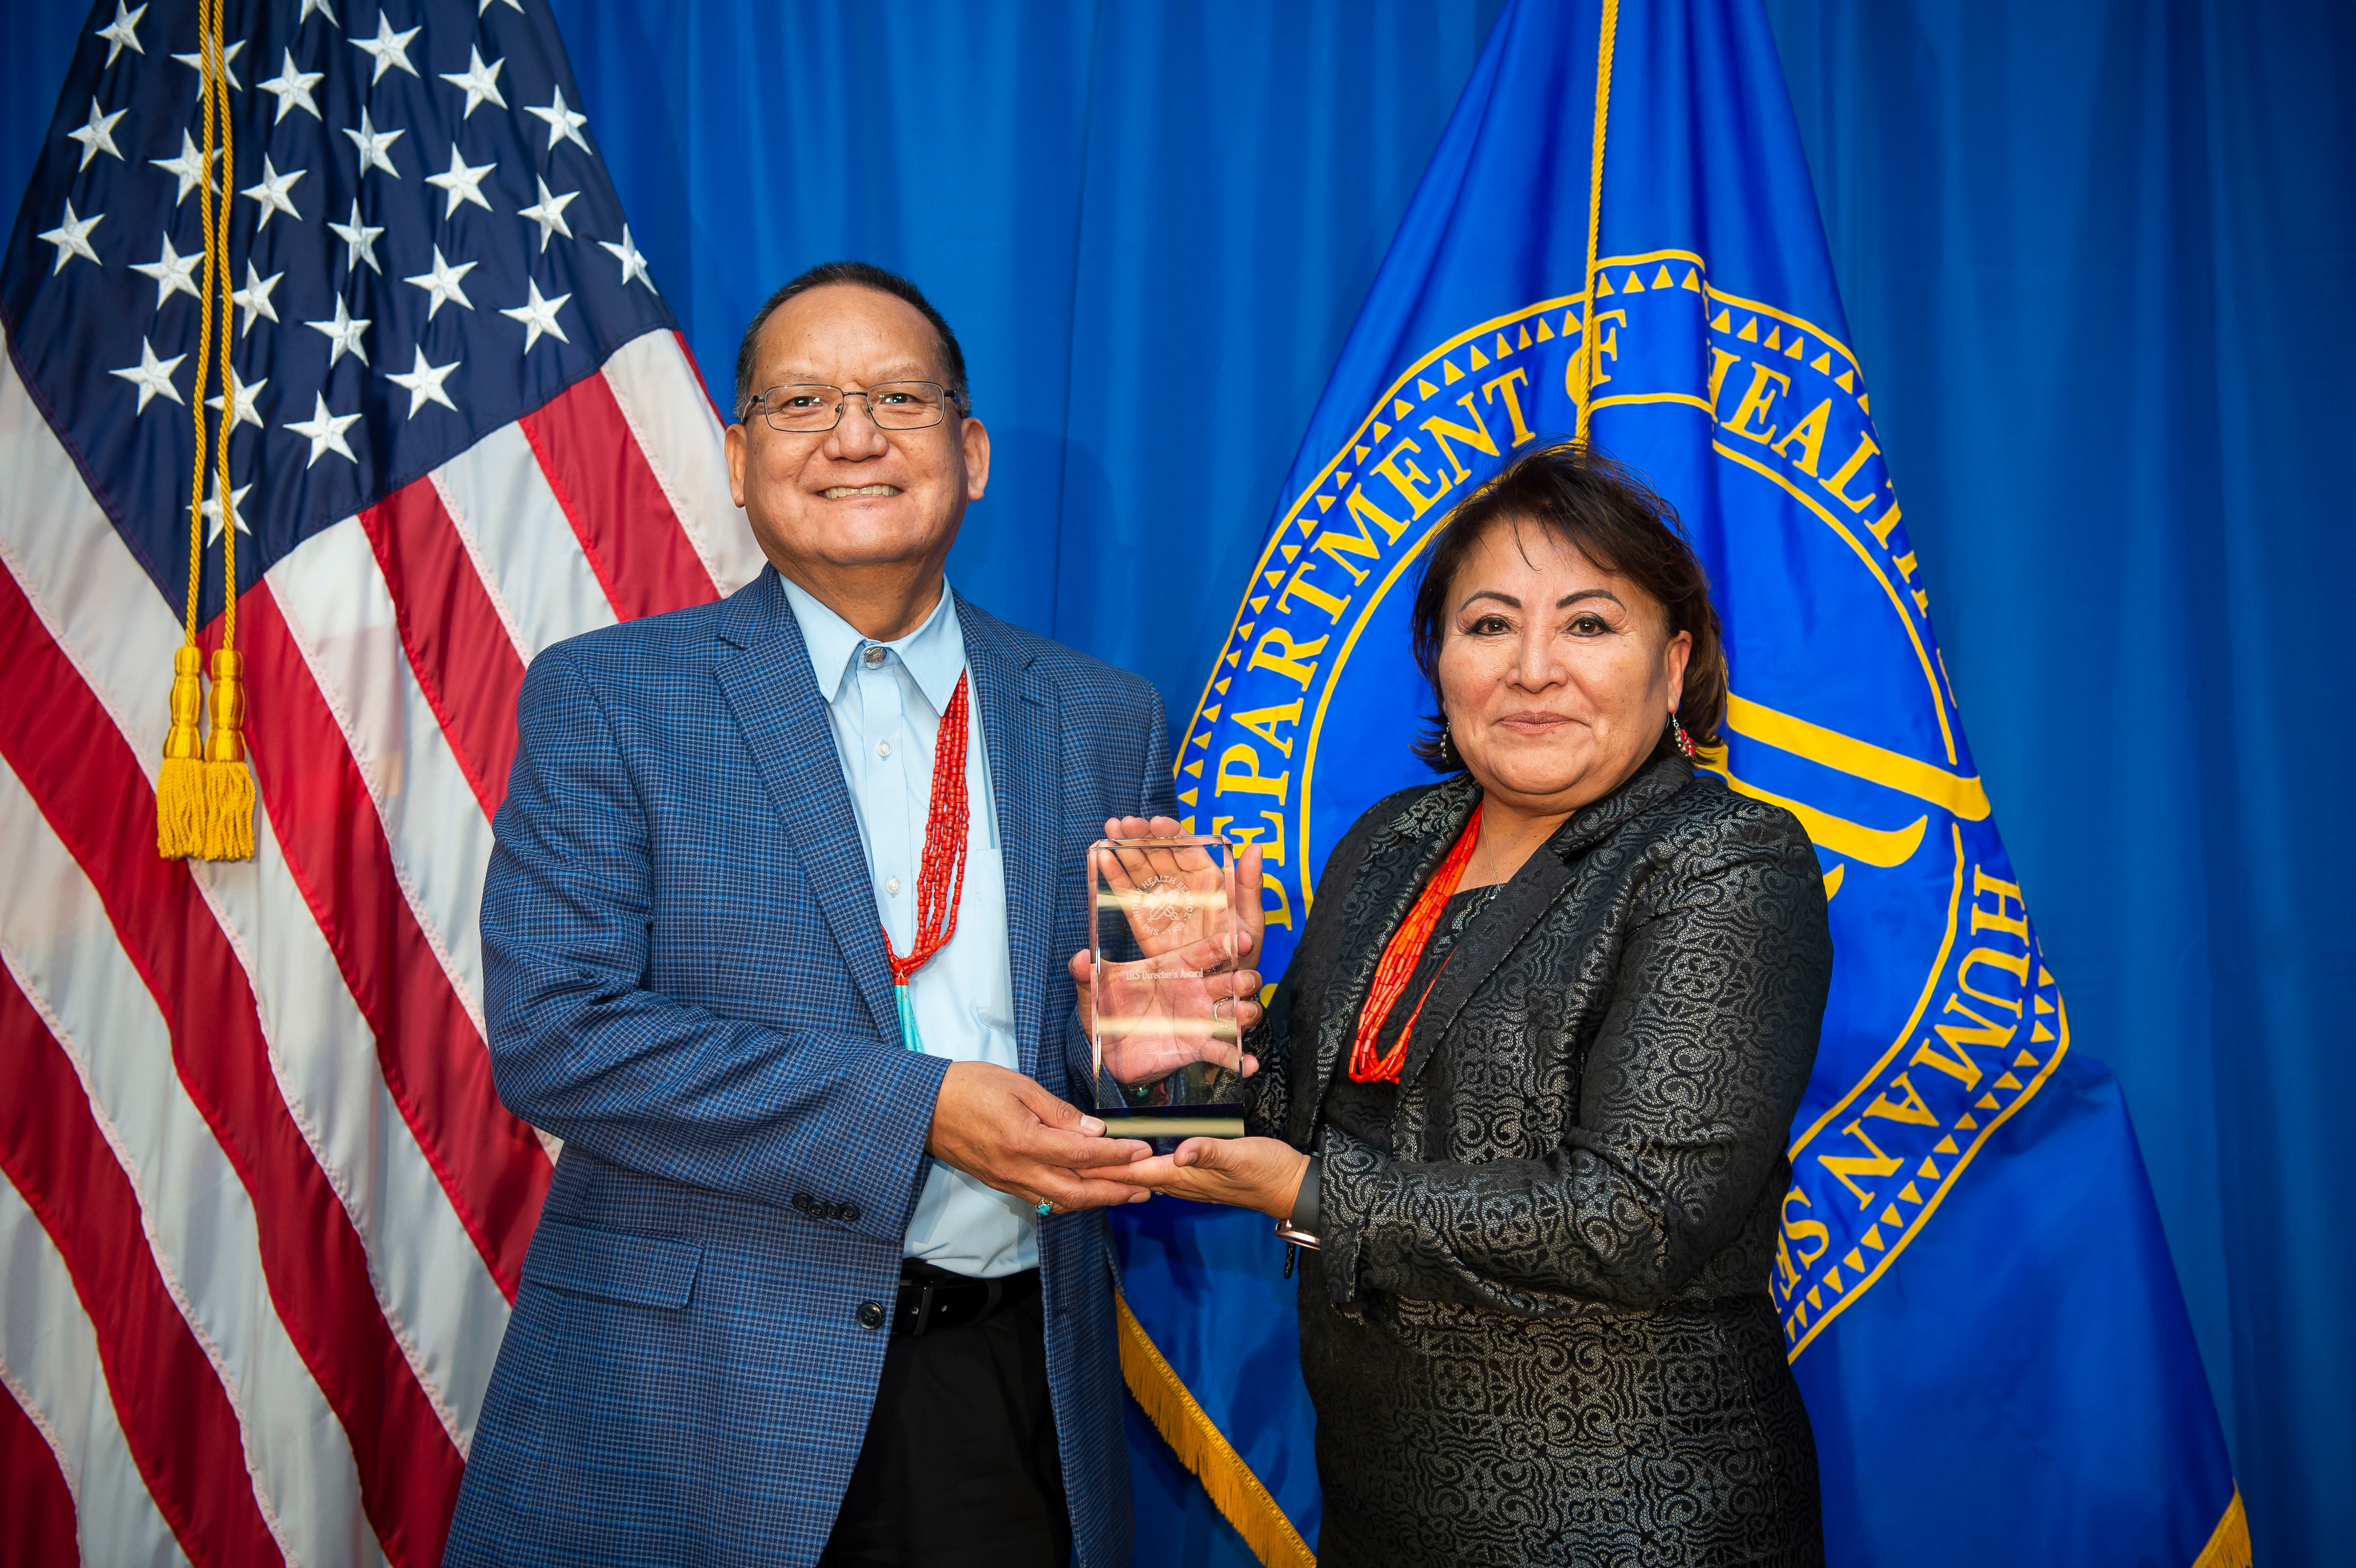 Director's Award - Team Category - Gary Russell-King receiving on behalf of Navajo Area Health Information Management Archiving Team  (Navajo)